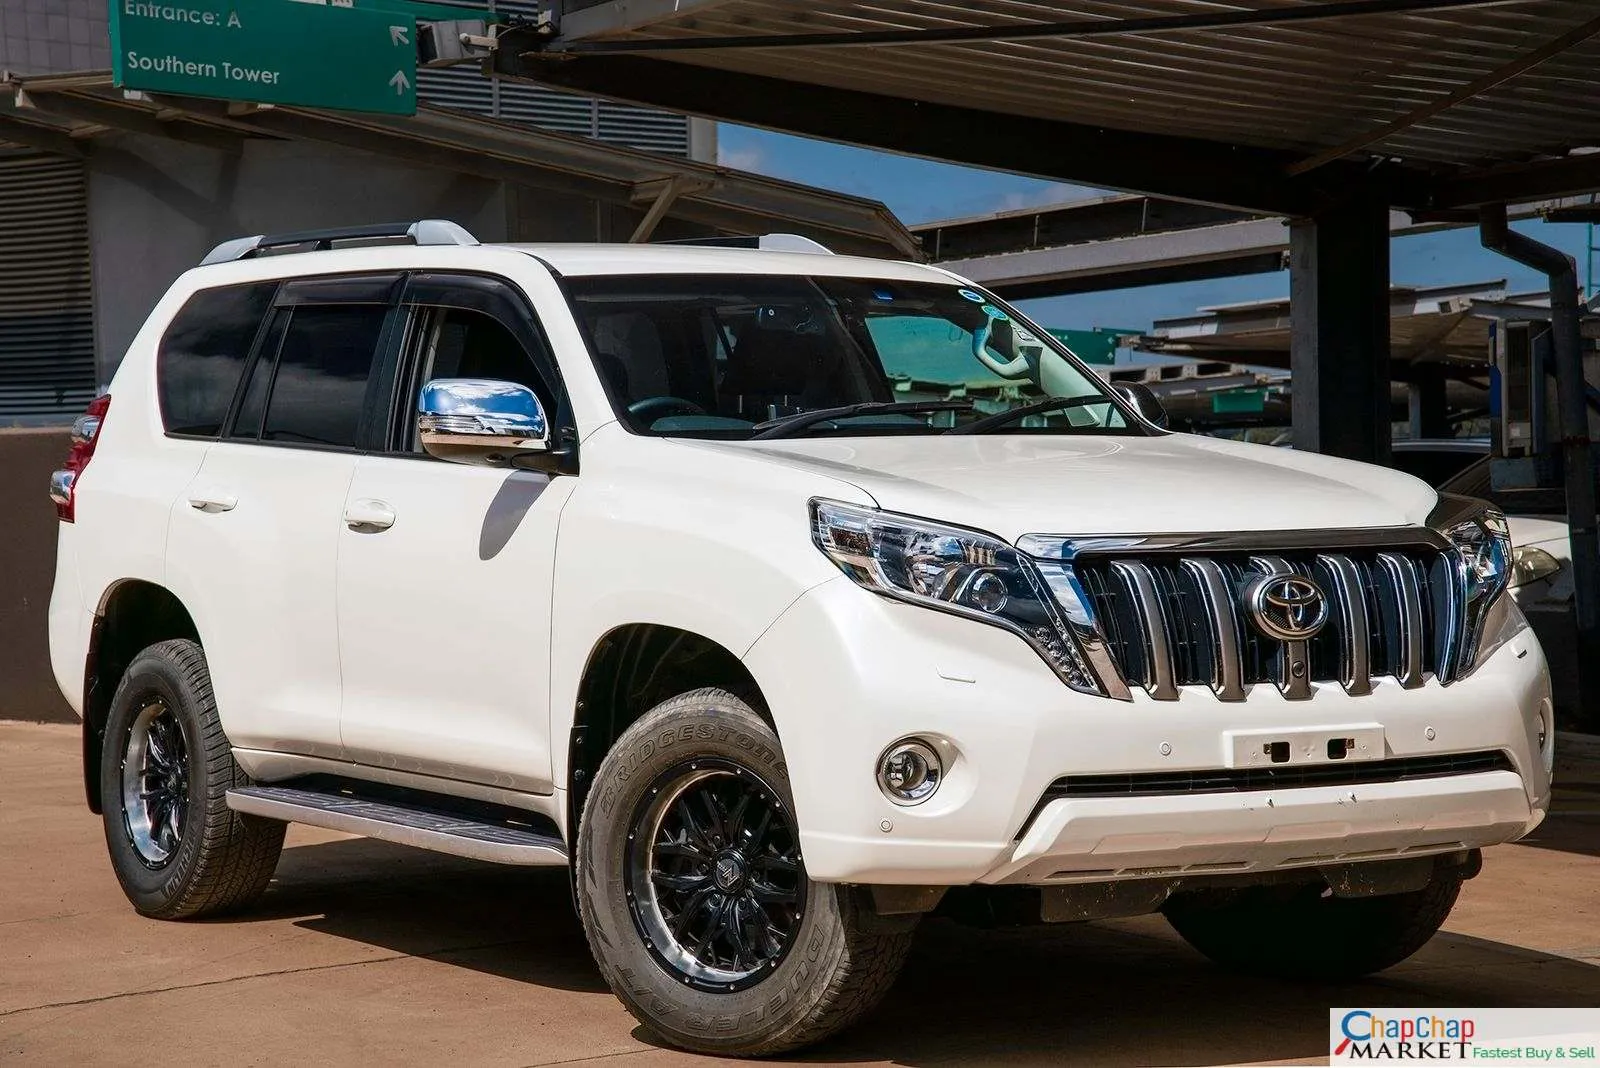 Toyota PRADO for sale in Kenya TXL Sunroof Quick SALE TRADE IN OK EXCLUSIVE! Hire purchase installments